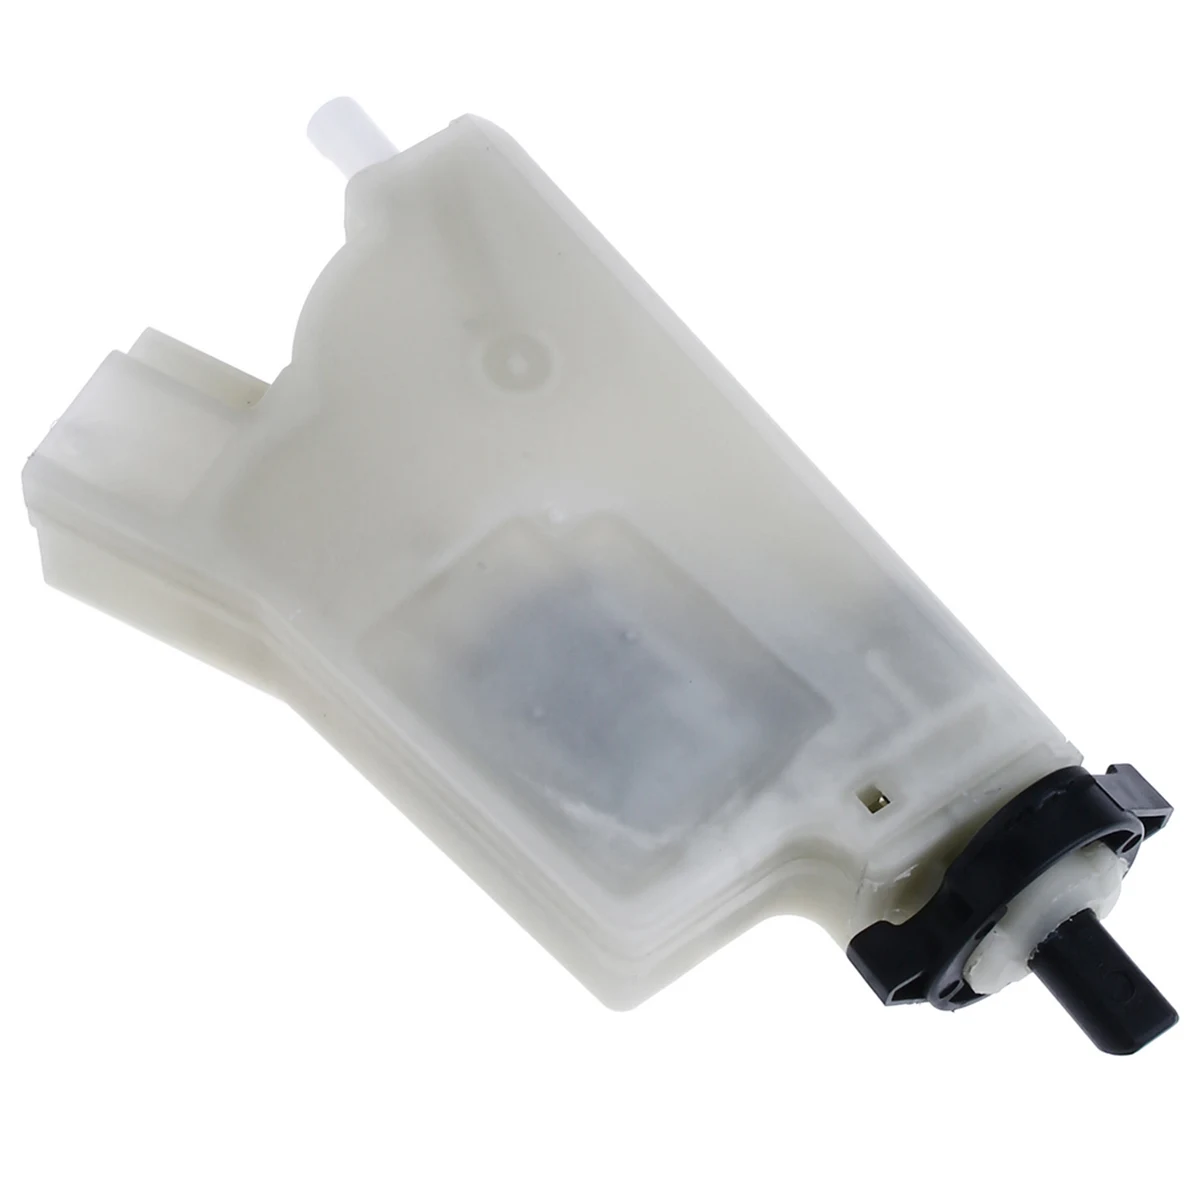 

In-stock CN US CA Fuel Lid Opener Actuator Assembly for Nissan Maxima 02-08 Murano Quest 04-09 New 788505Y700